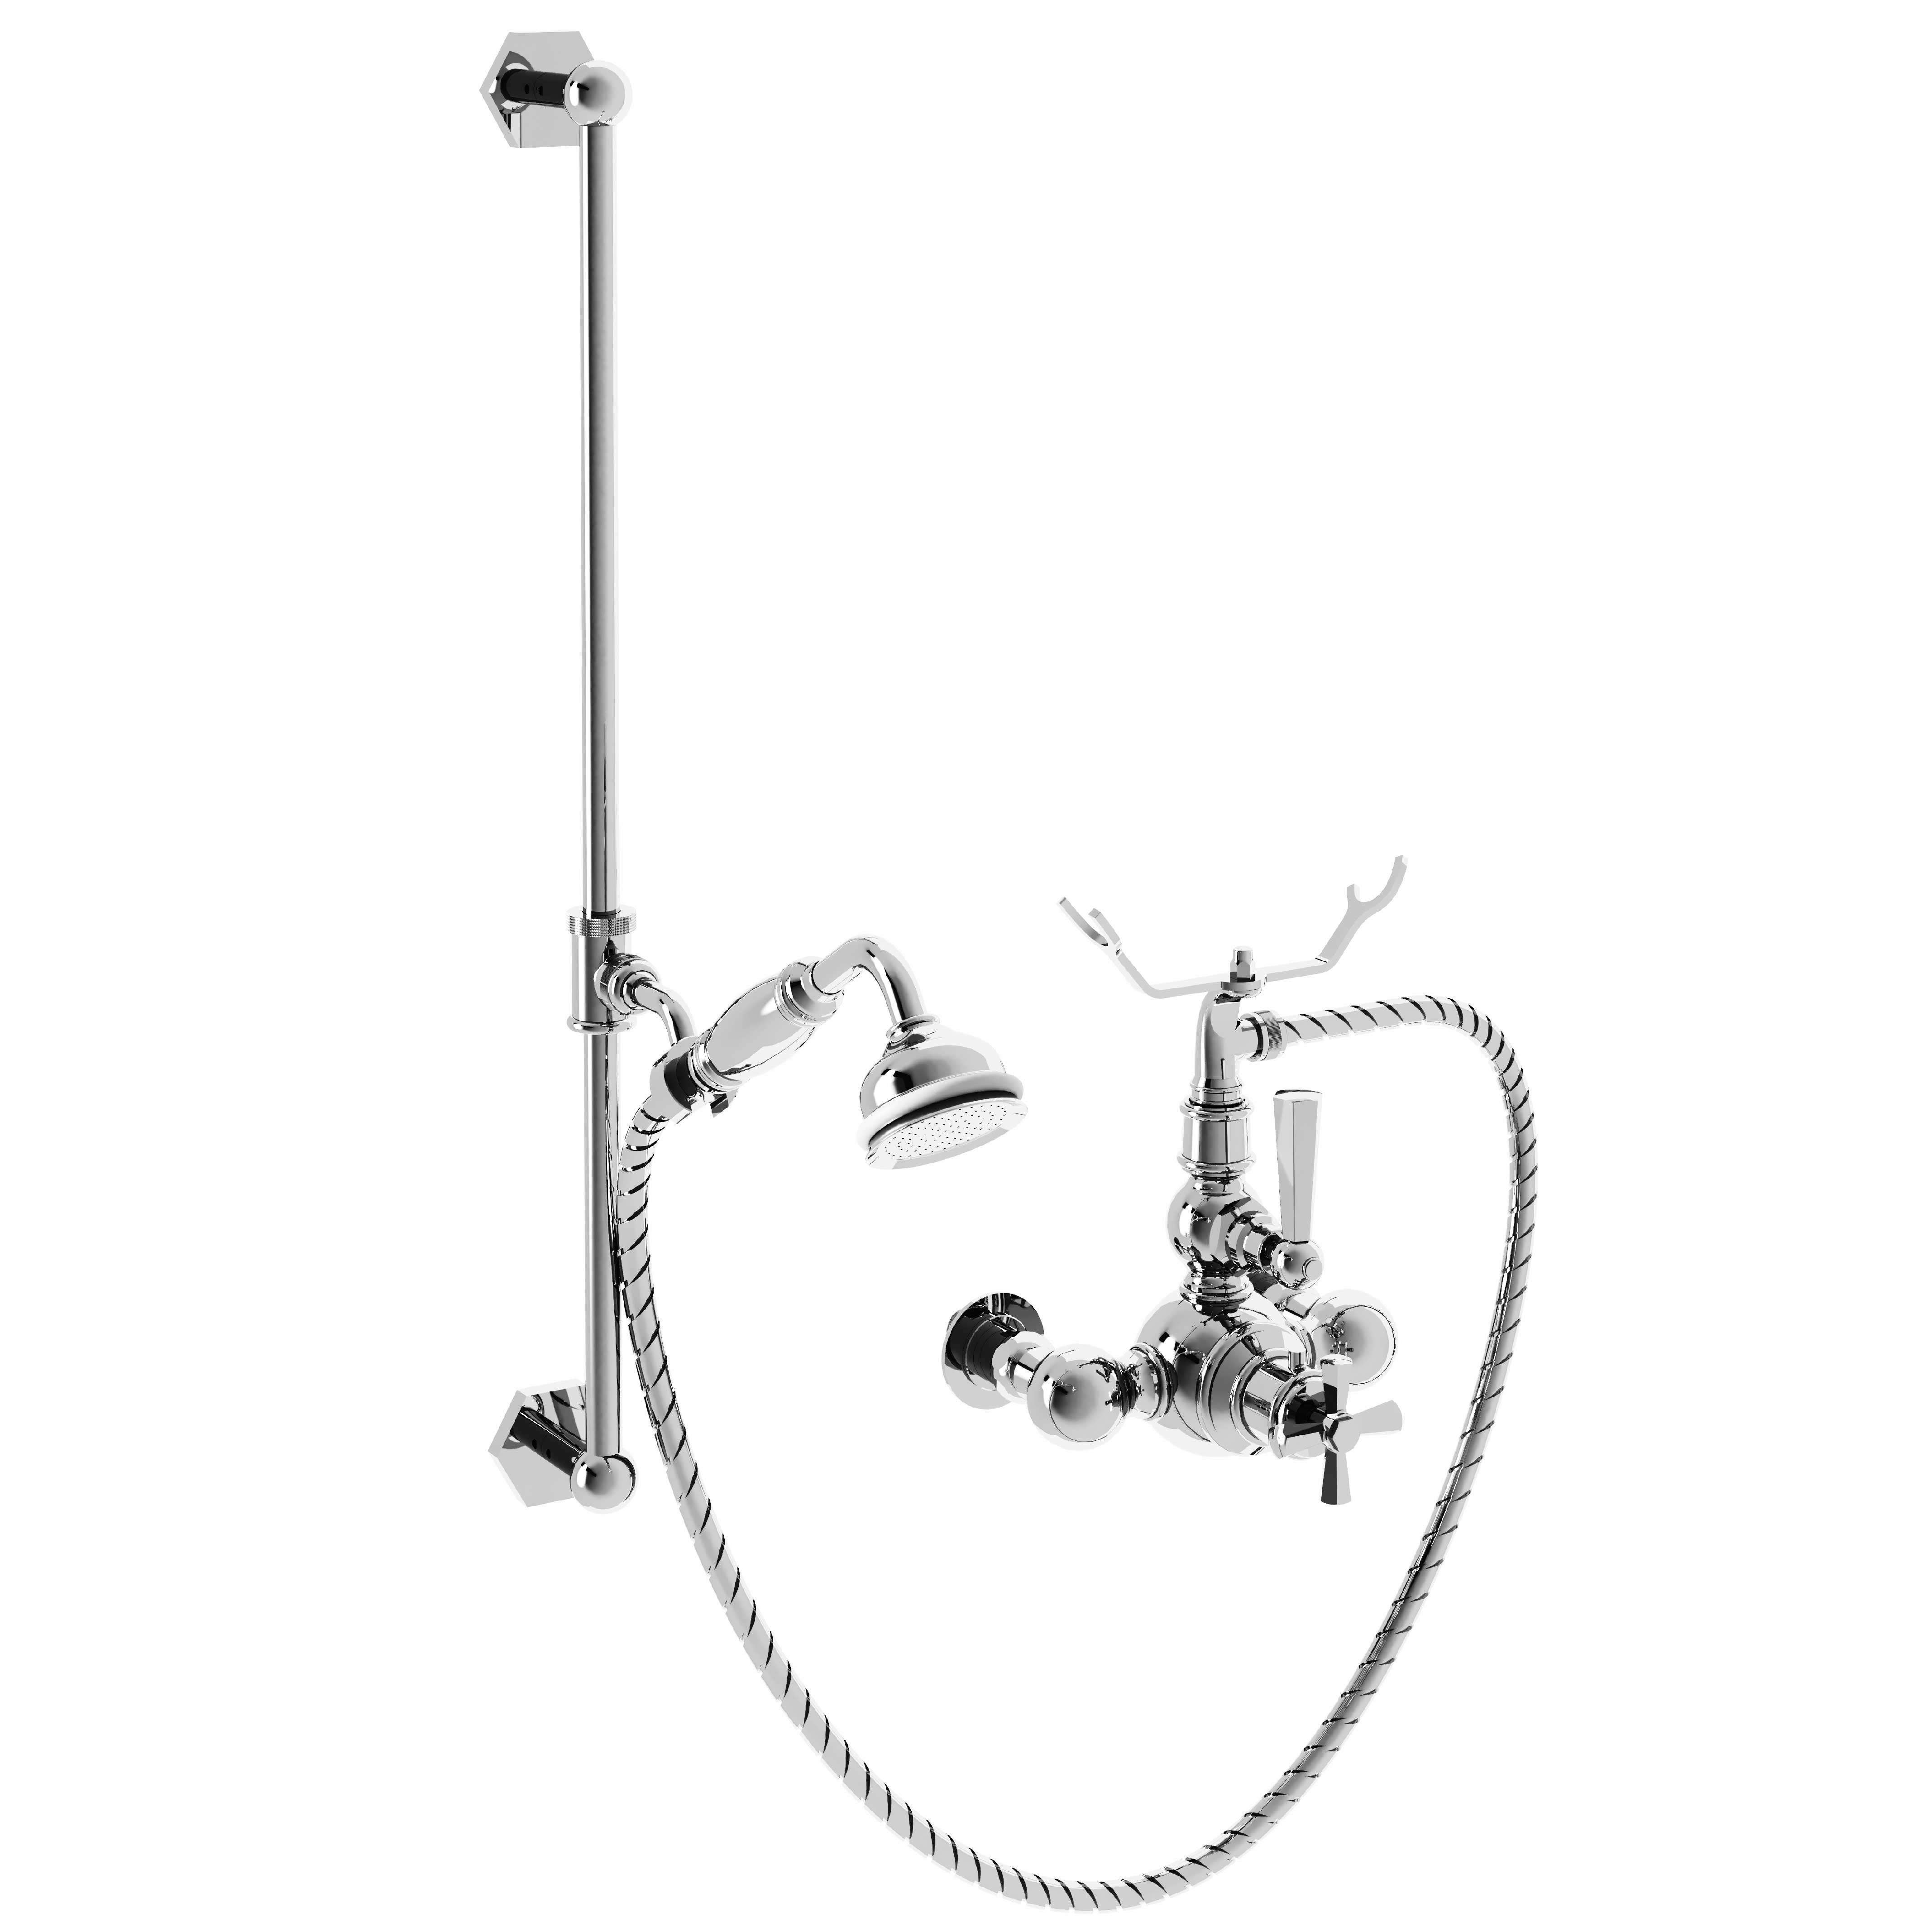 M38-2202T Mitigeur thermo. douche, coulidouche